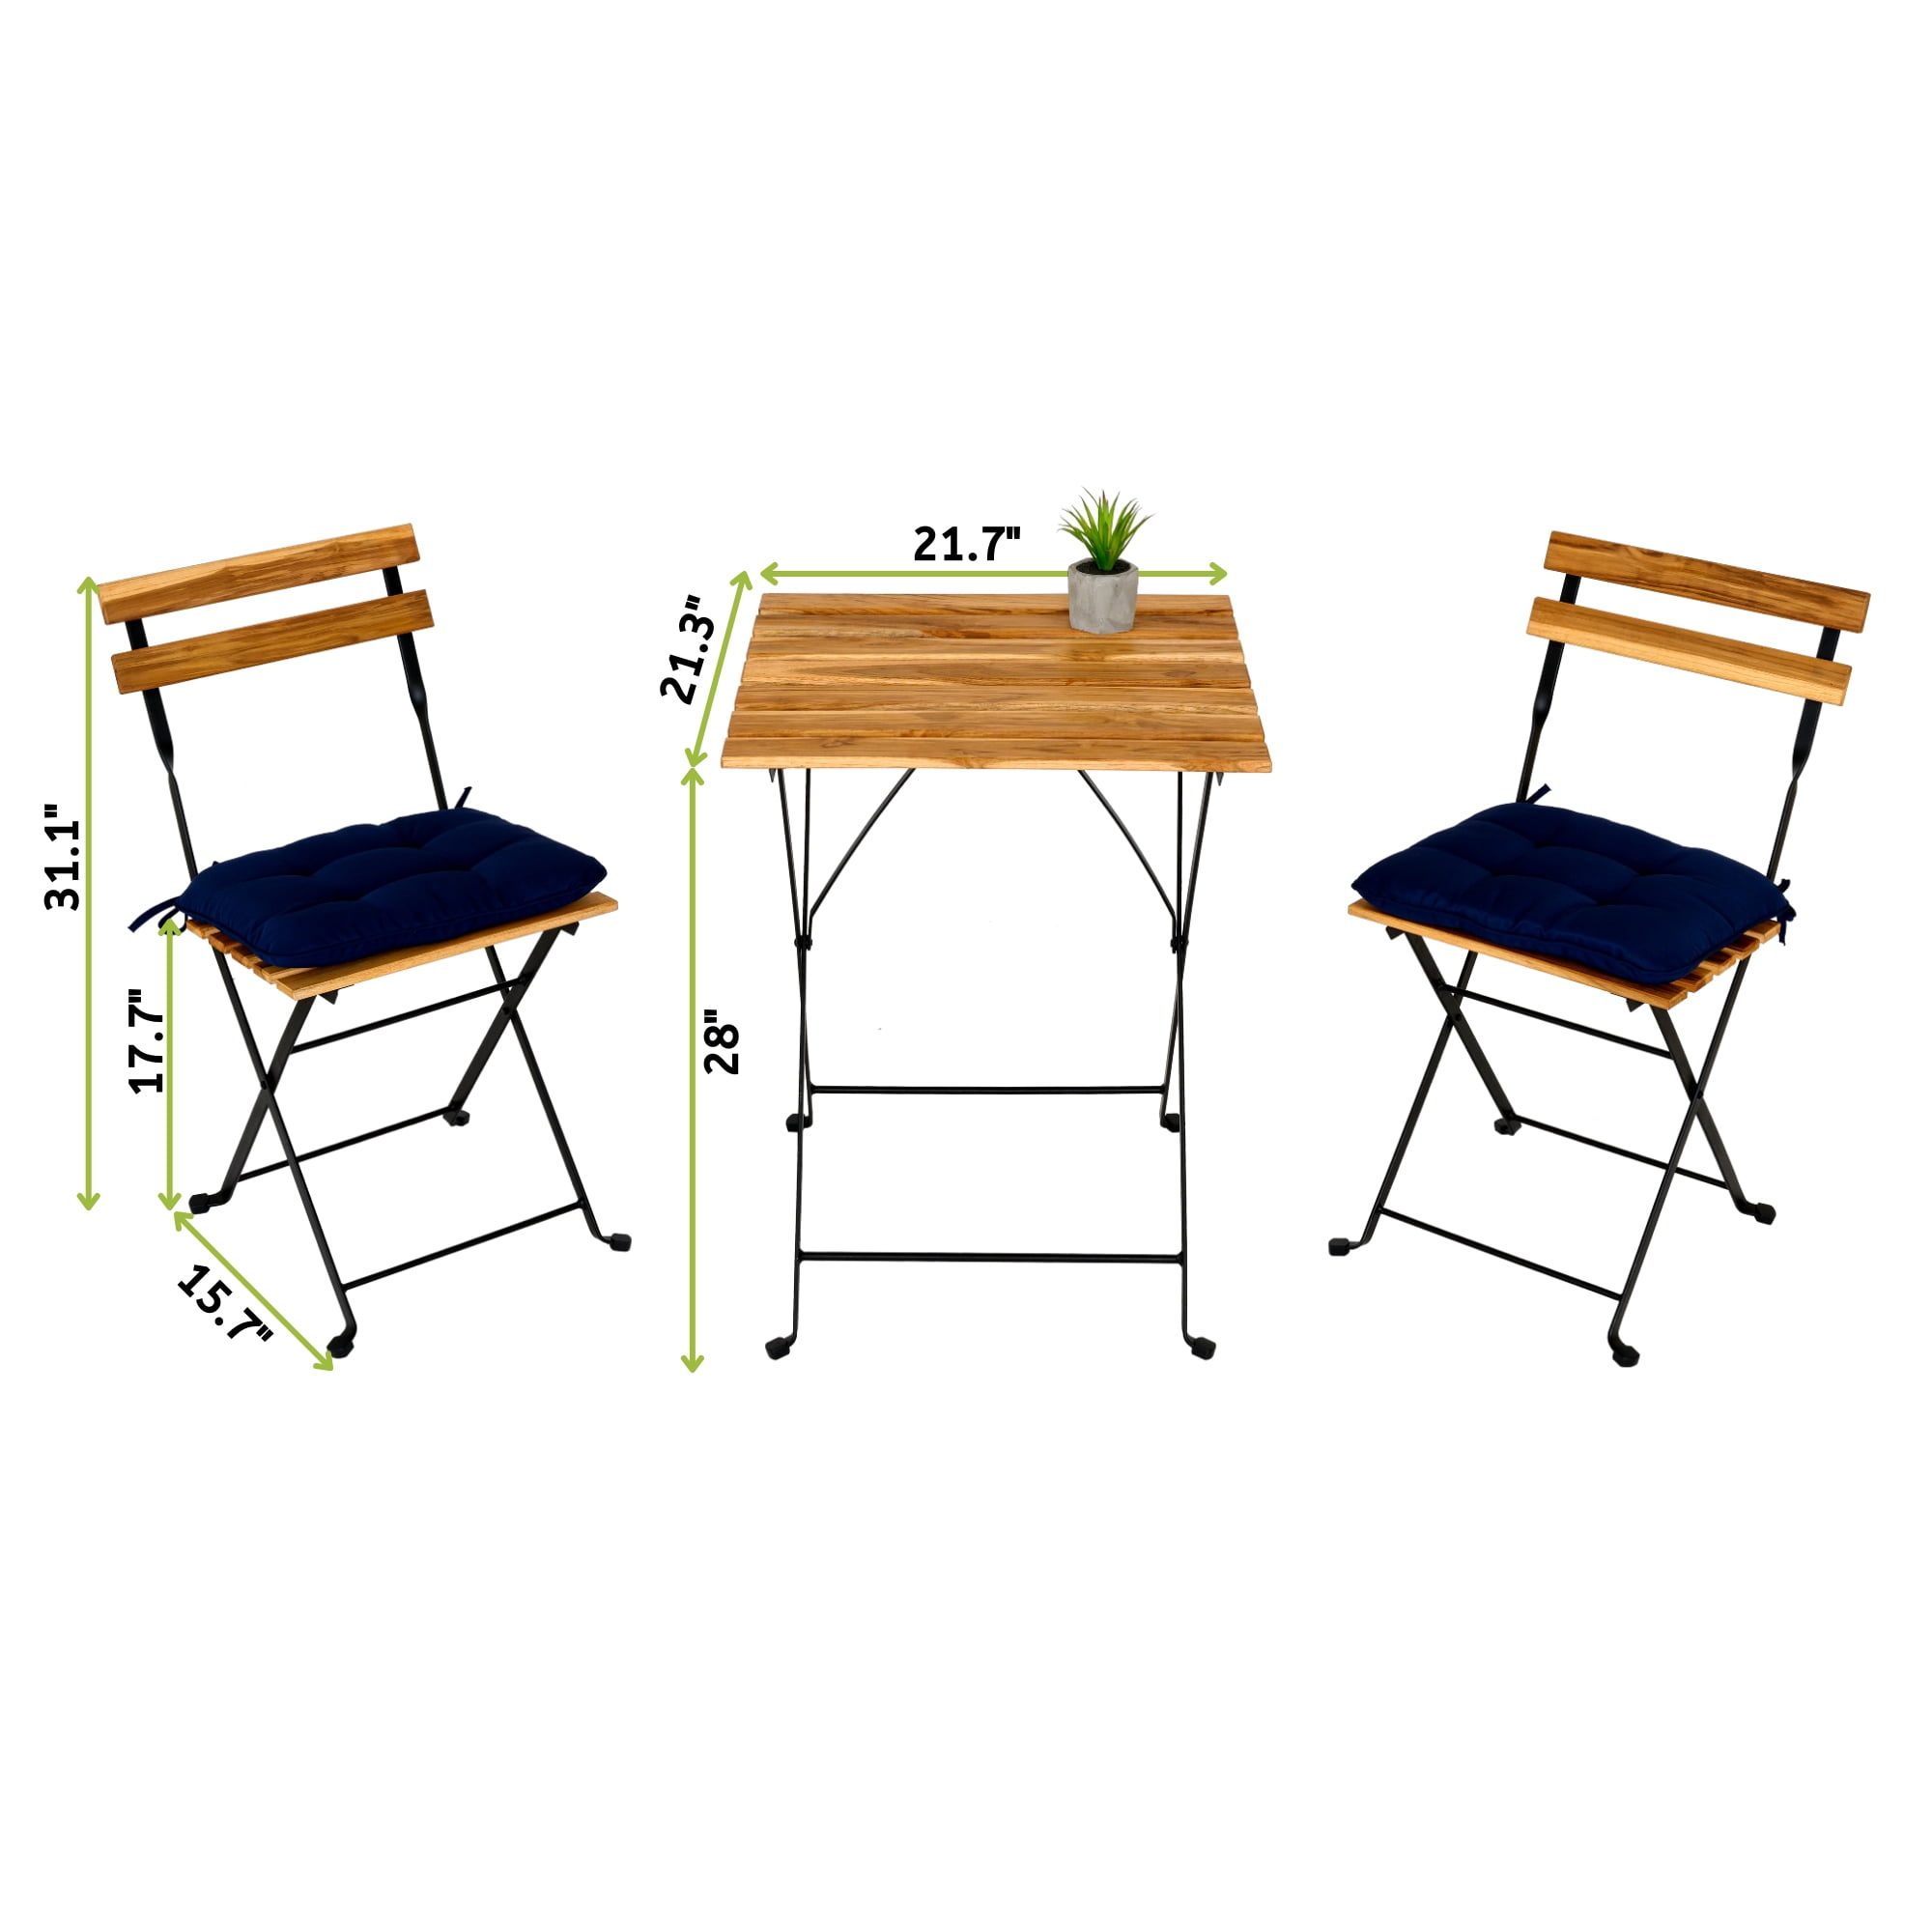 Anysun 3-Piece Patio Furniture Sets - Outdoor Wooden Folding Table 